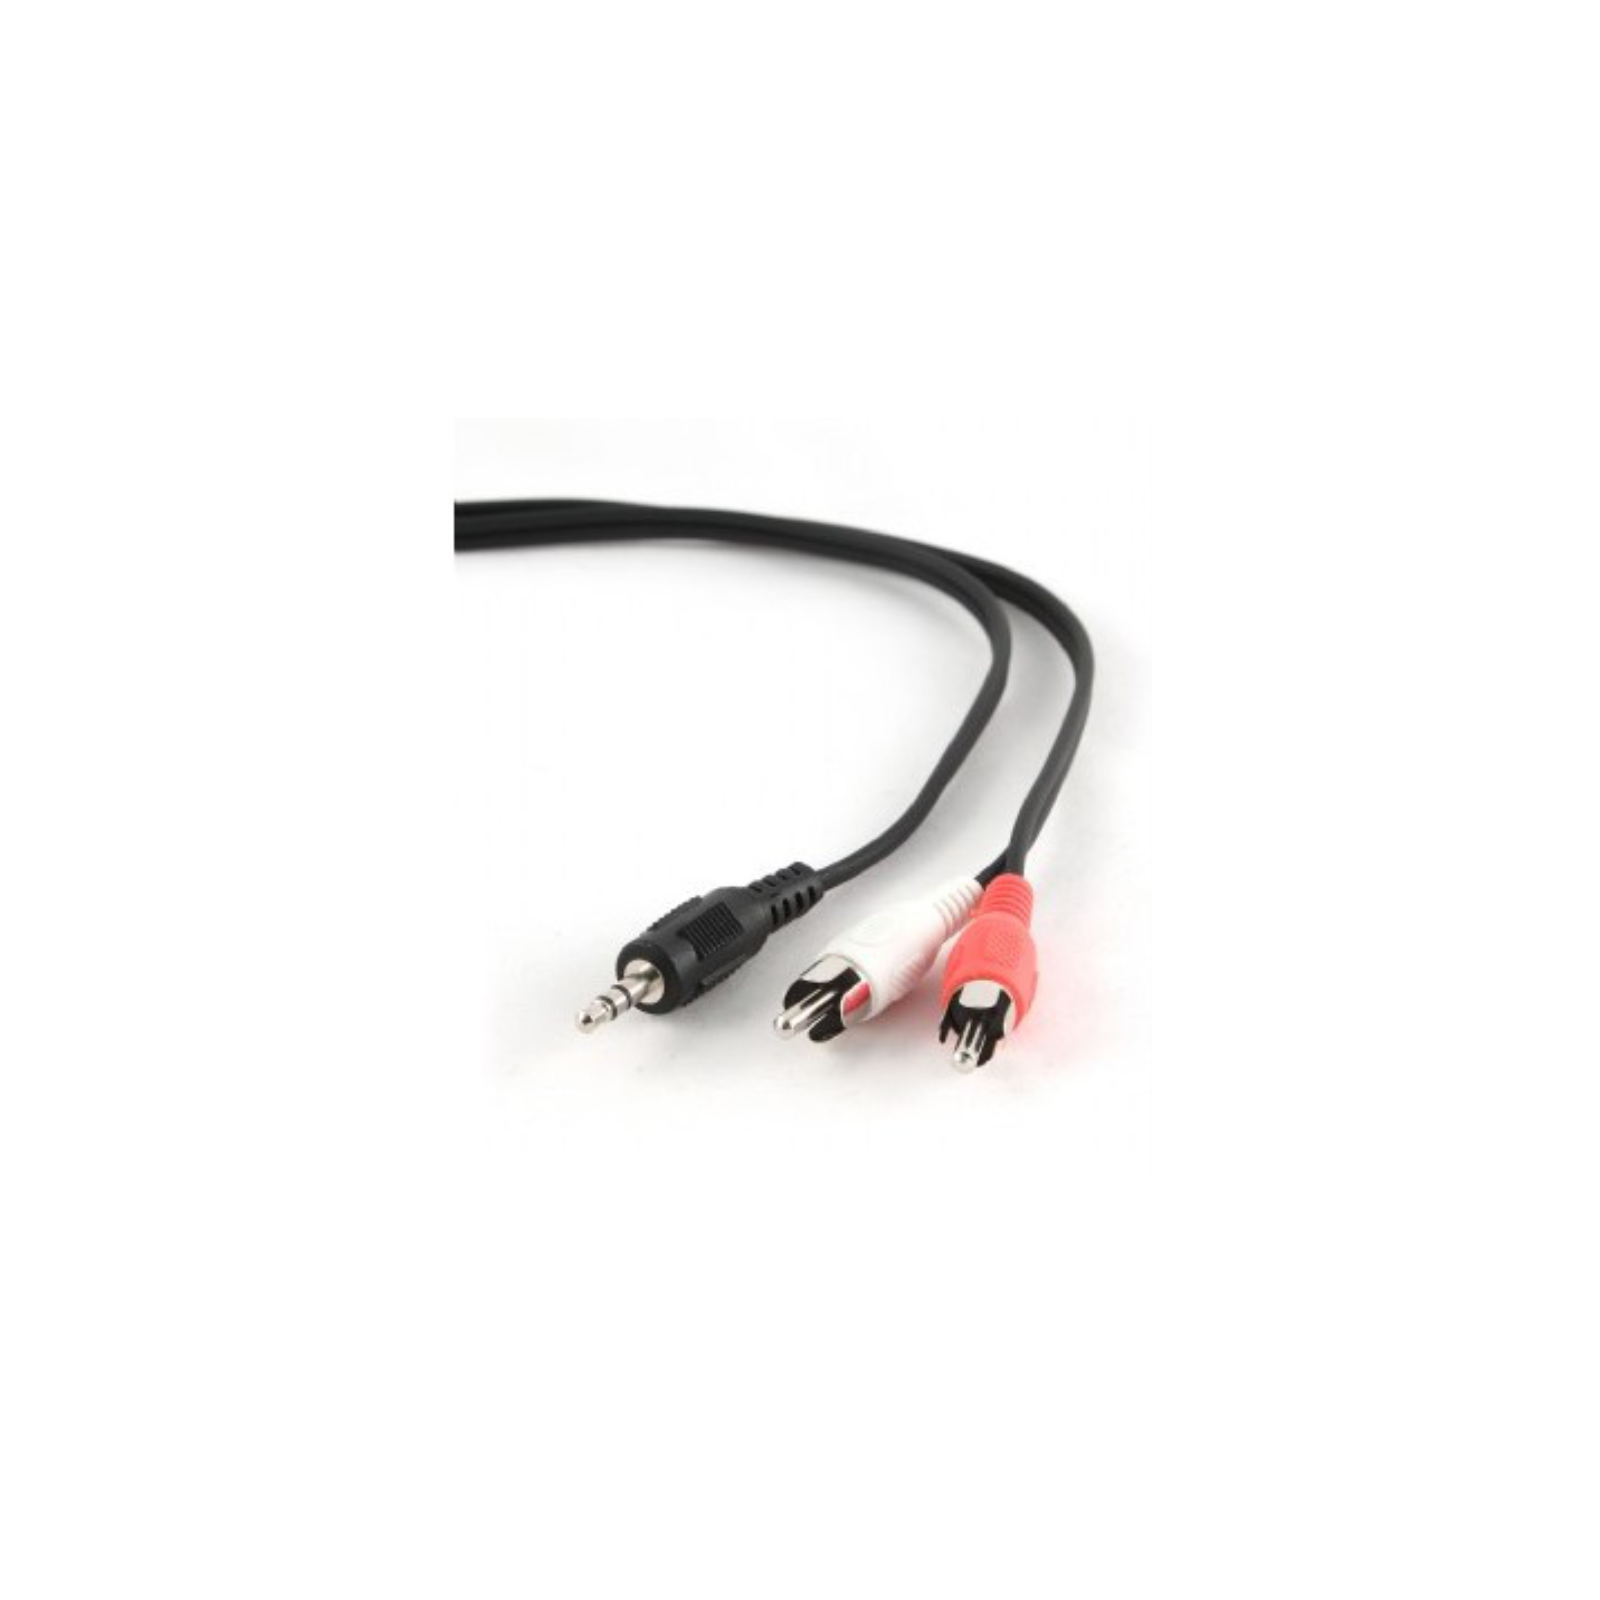 CABLE AUDIO GEMBIRD CONECTOR 35MM A RCA 15M